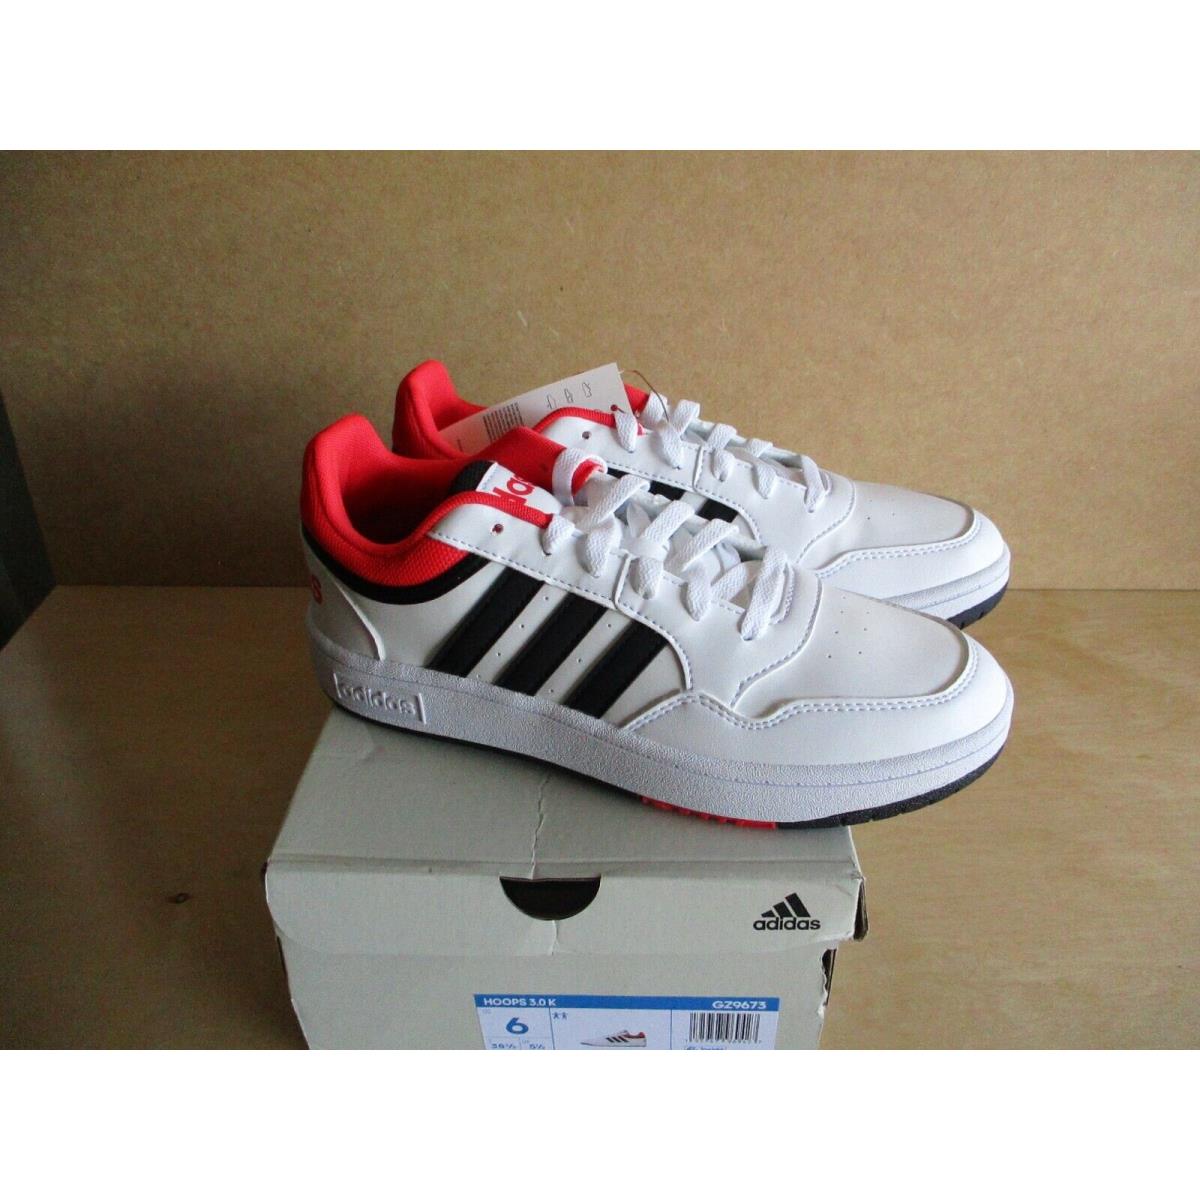 Adidas Hoops 3.0 K White Black Red Basketball Shoes Size 6